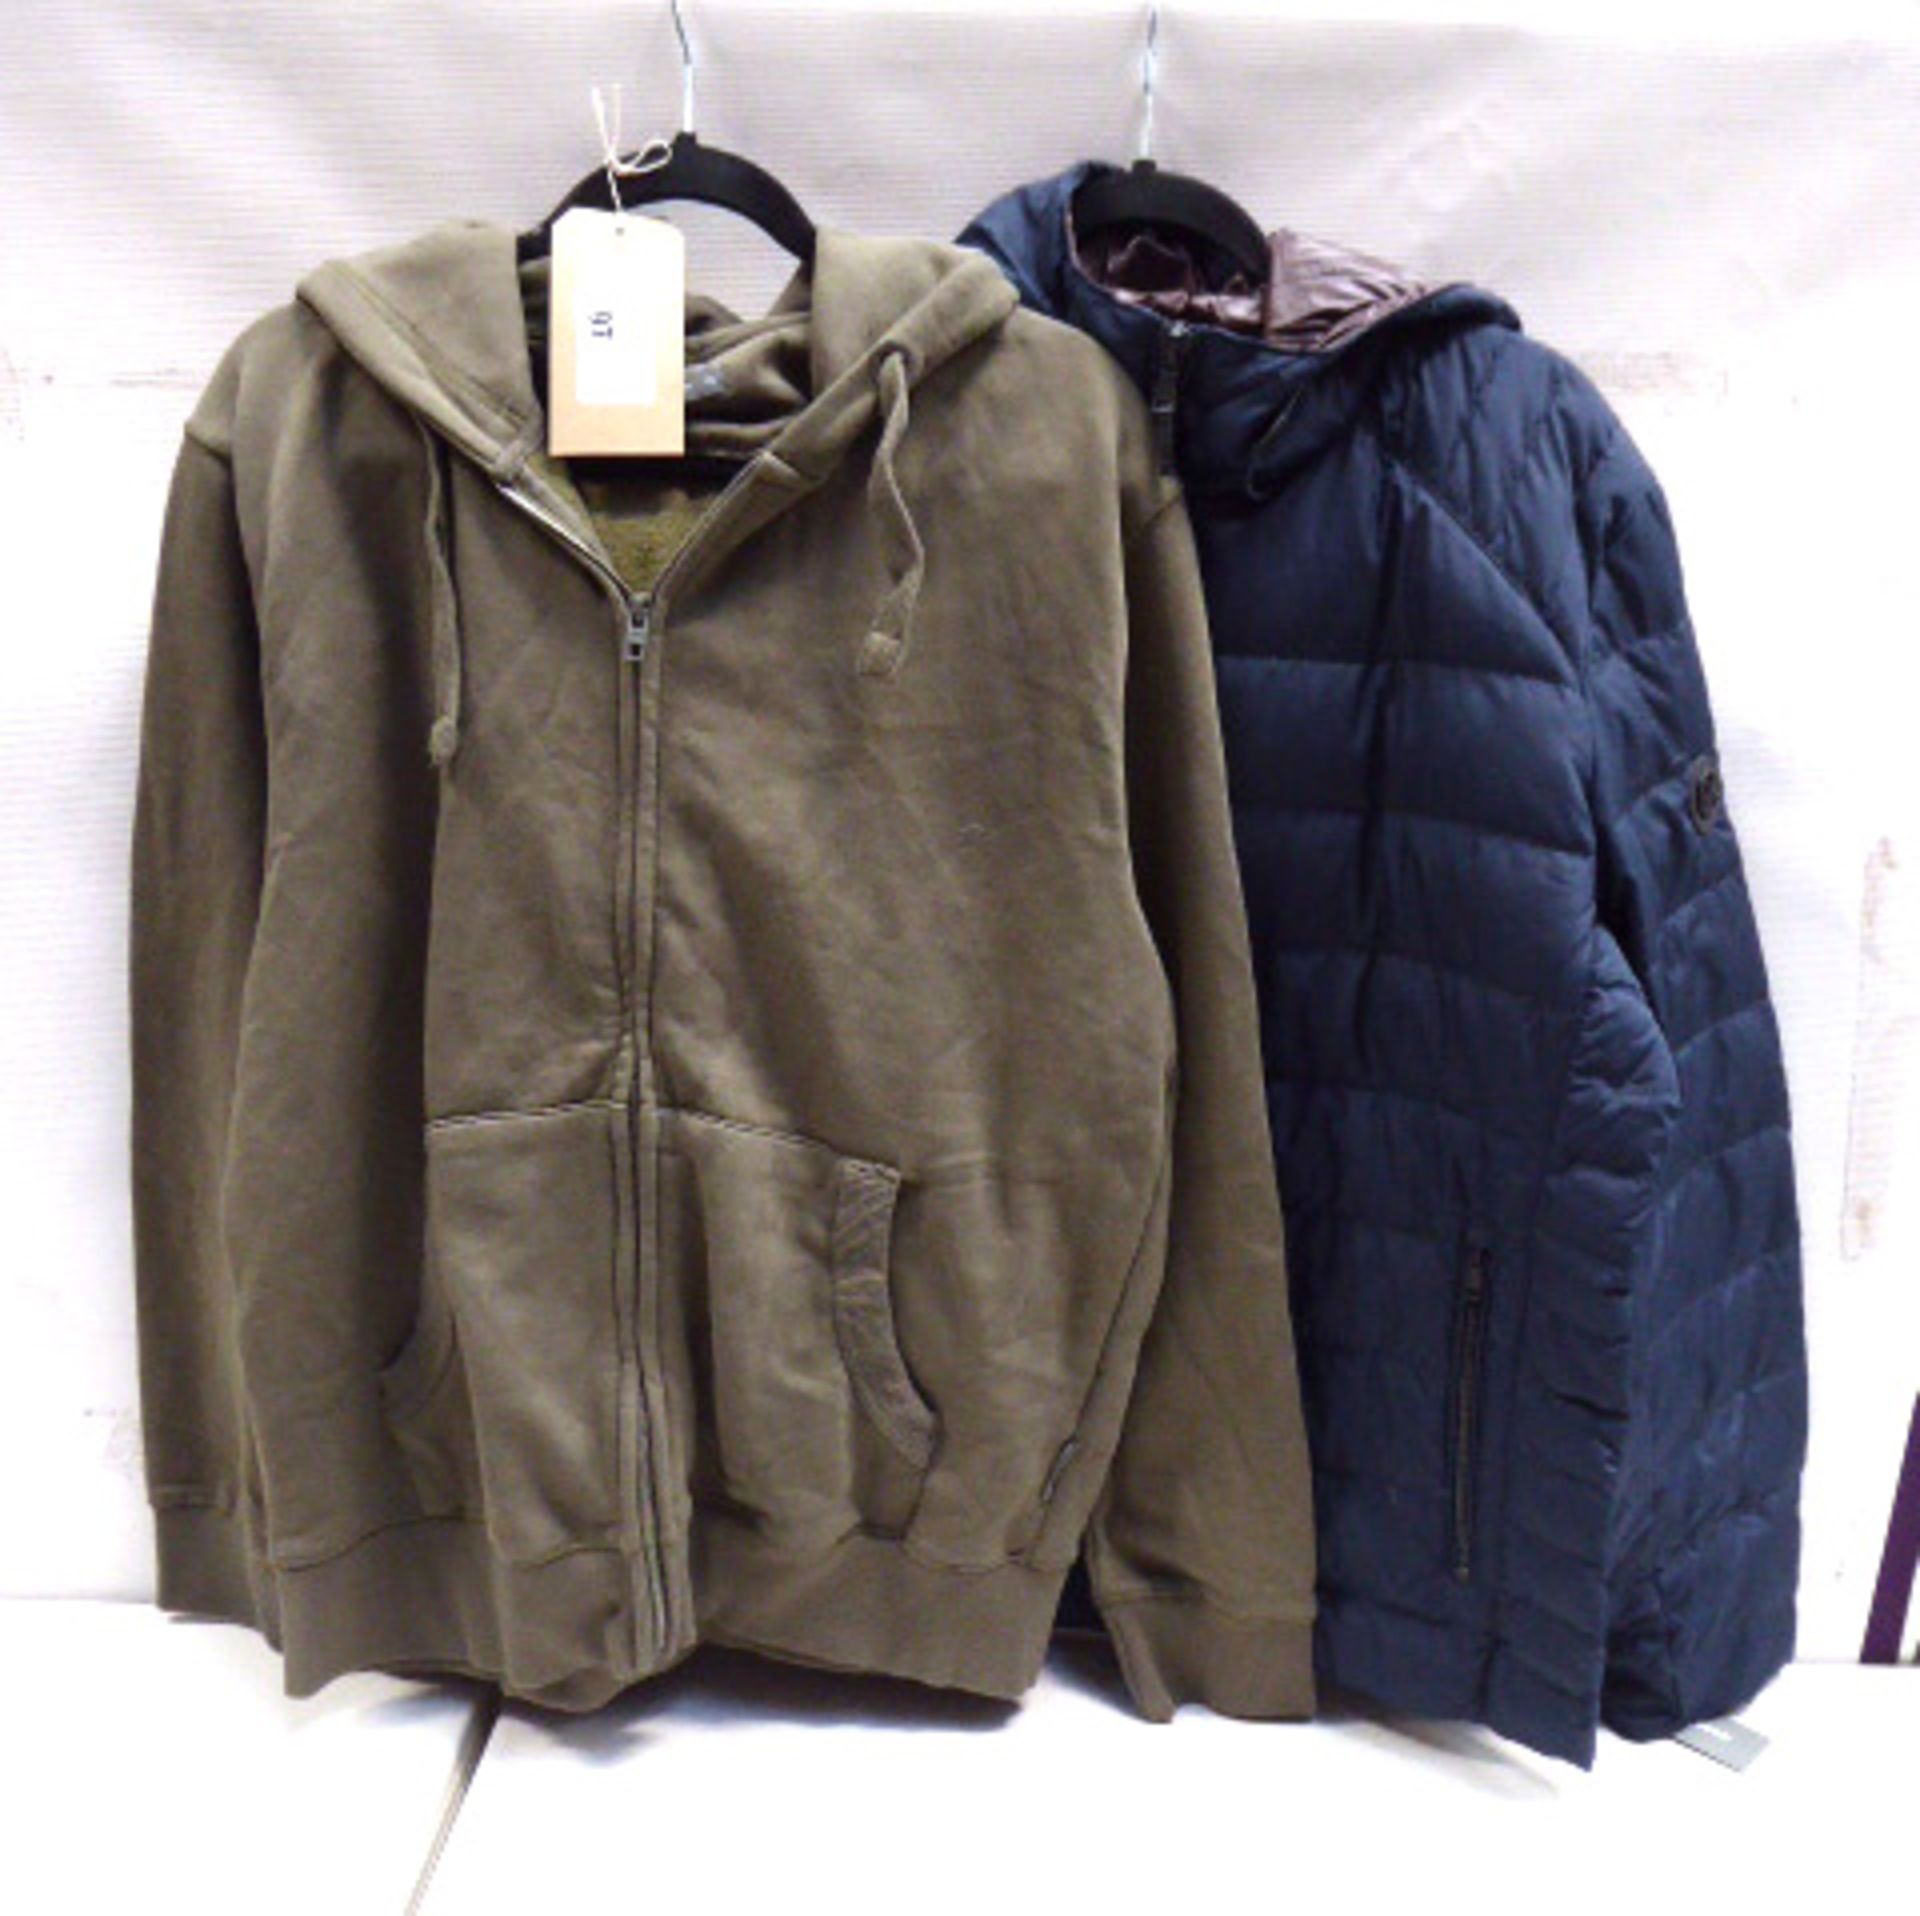 French Connection green hooded sweatshirt size xlarge (used) and Michael Kors blue jacket size large